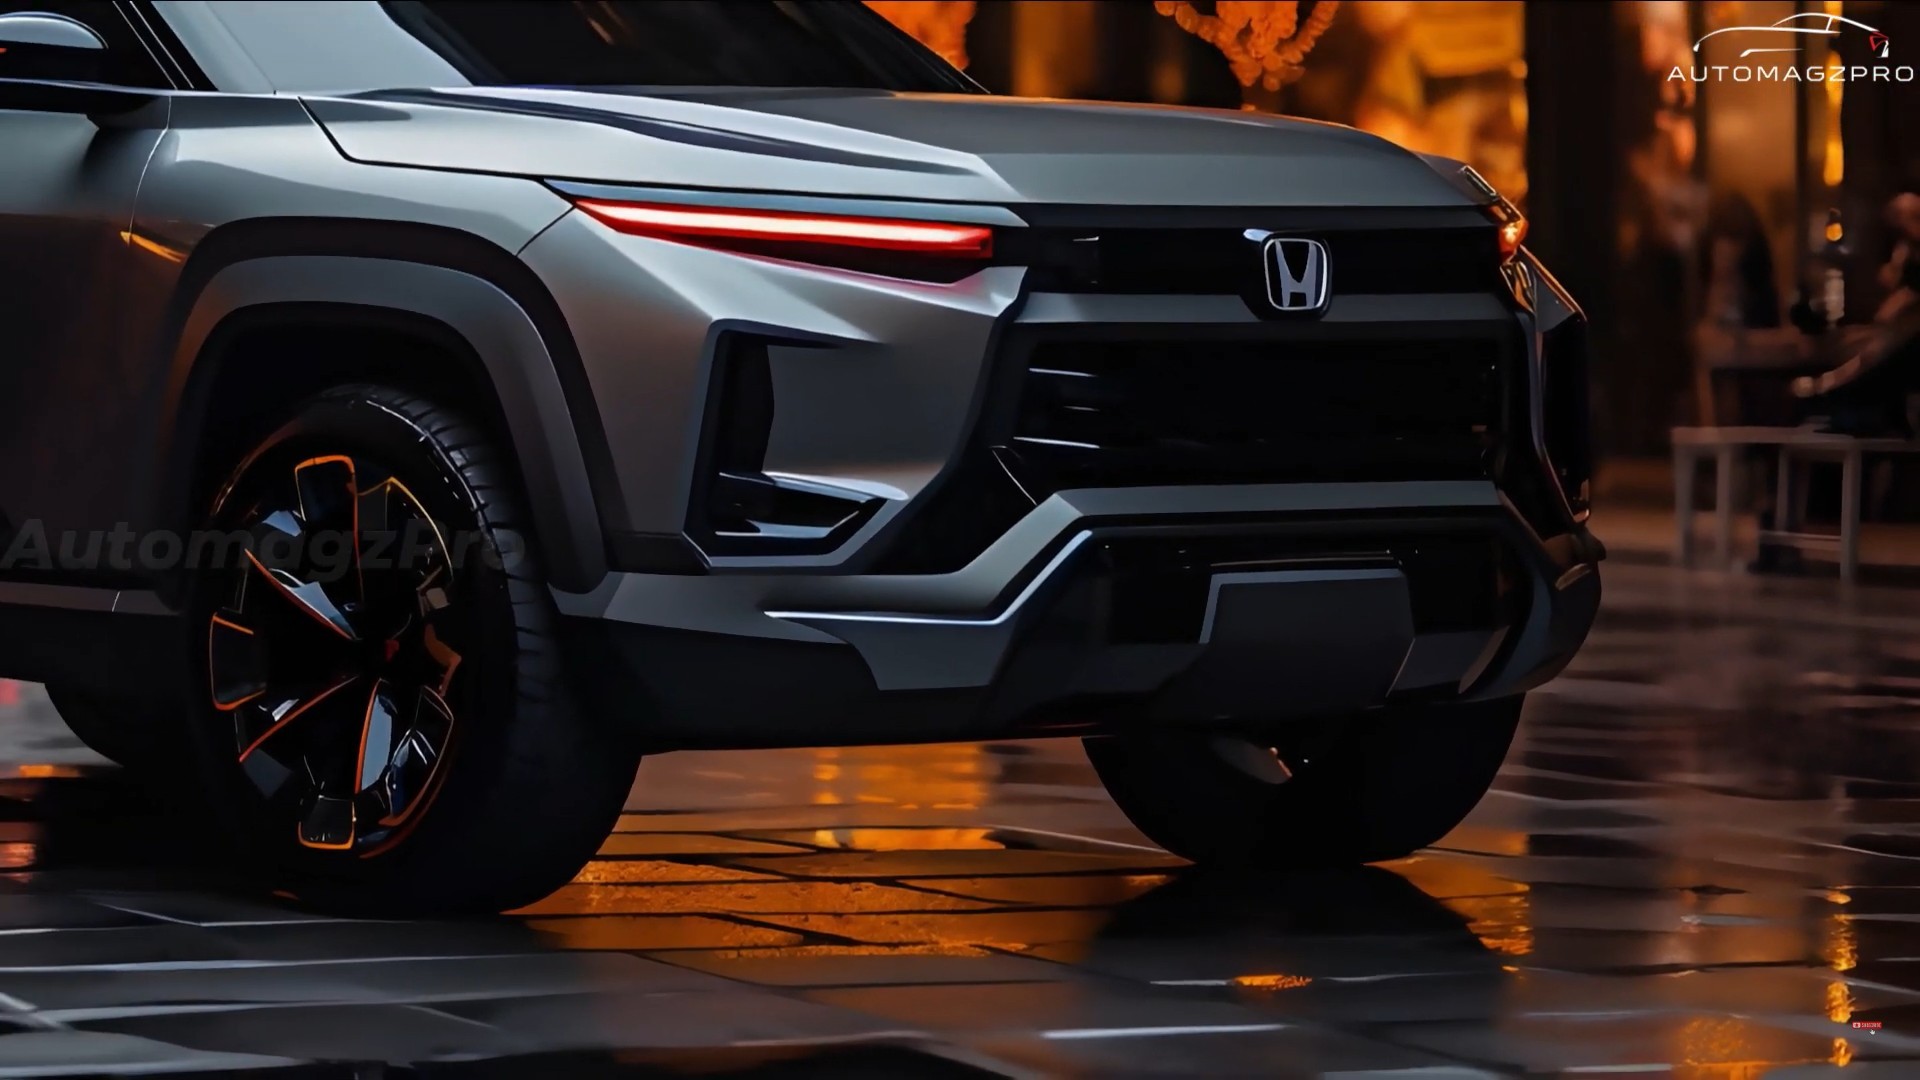 fresh-2025-honda-passport-hybrid-gets-digitally-unveiled-as-a-must-have-electrified-cuv-3.jpg